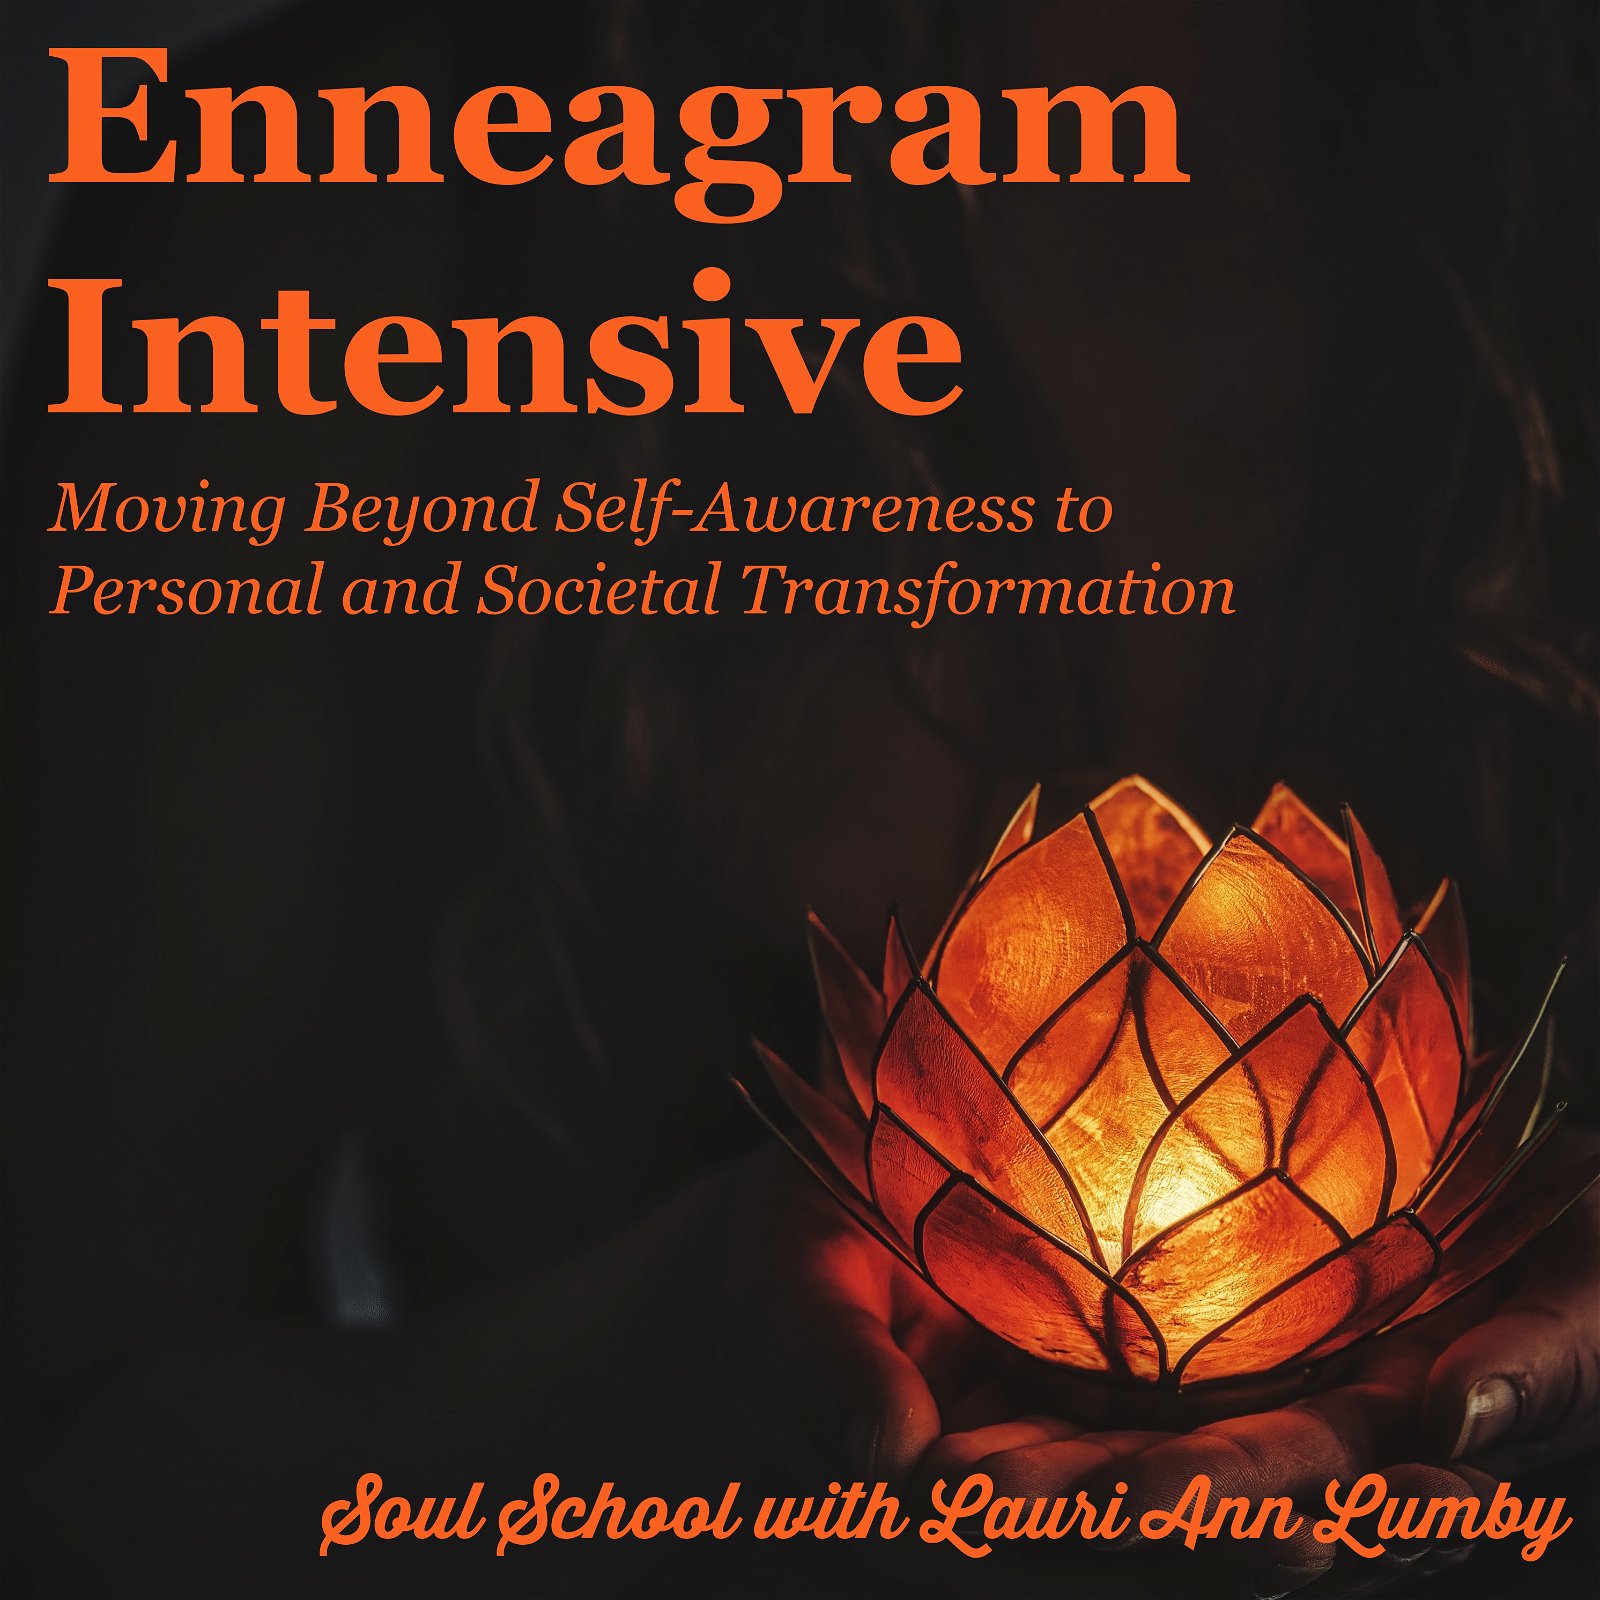 Enneagram Intensive -  Moving Beyond Self-Awareness to Personal and Societal Transformation